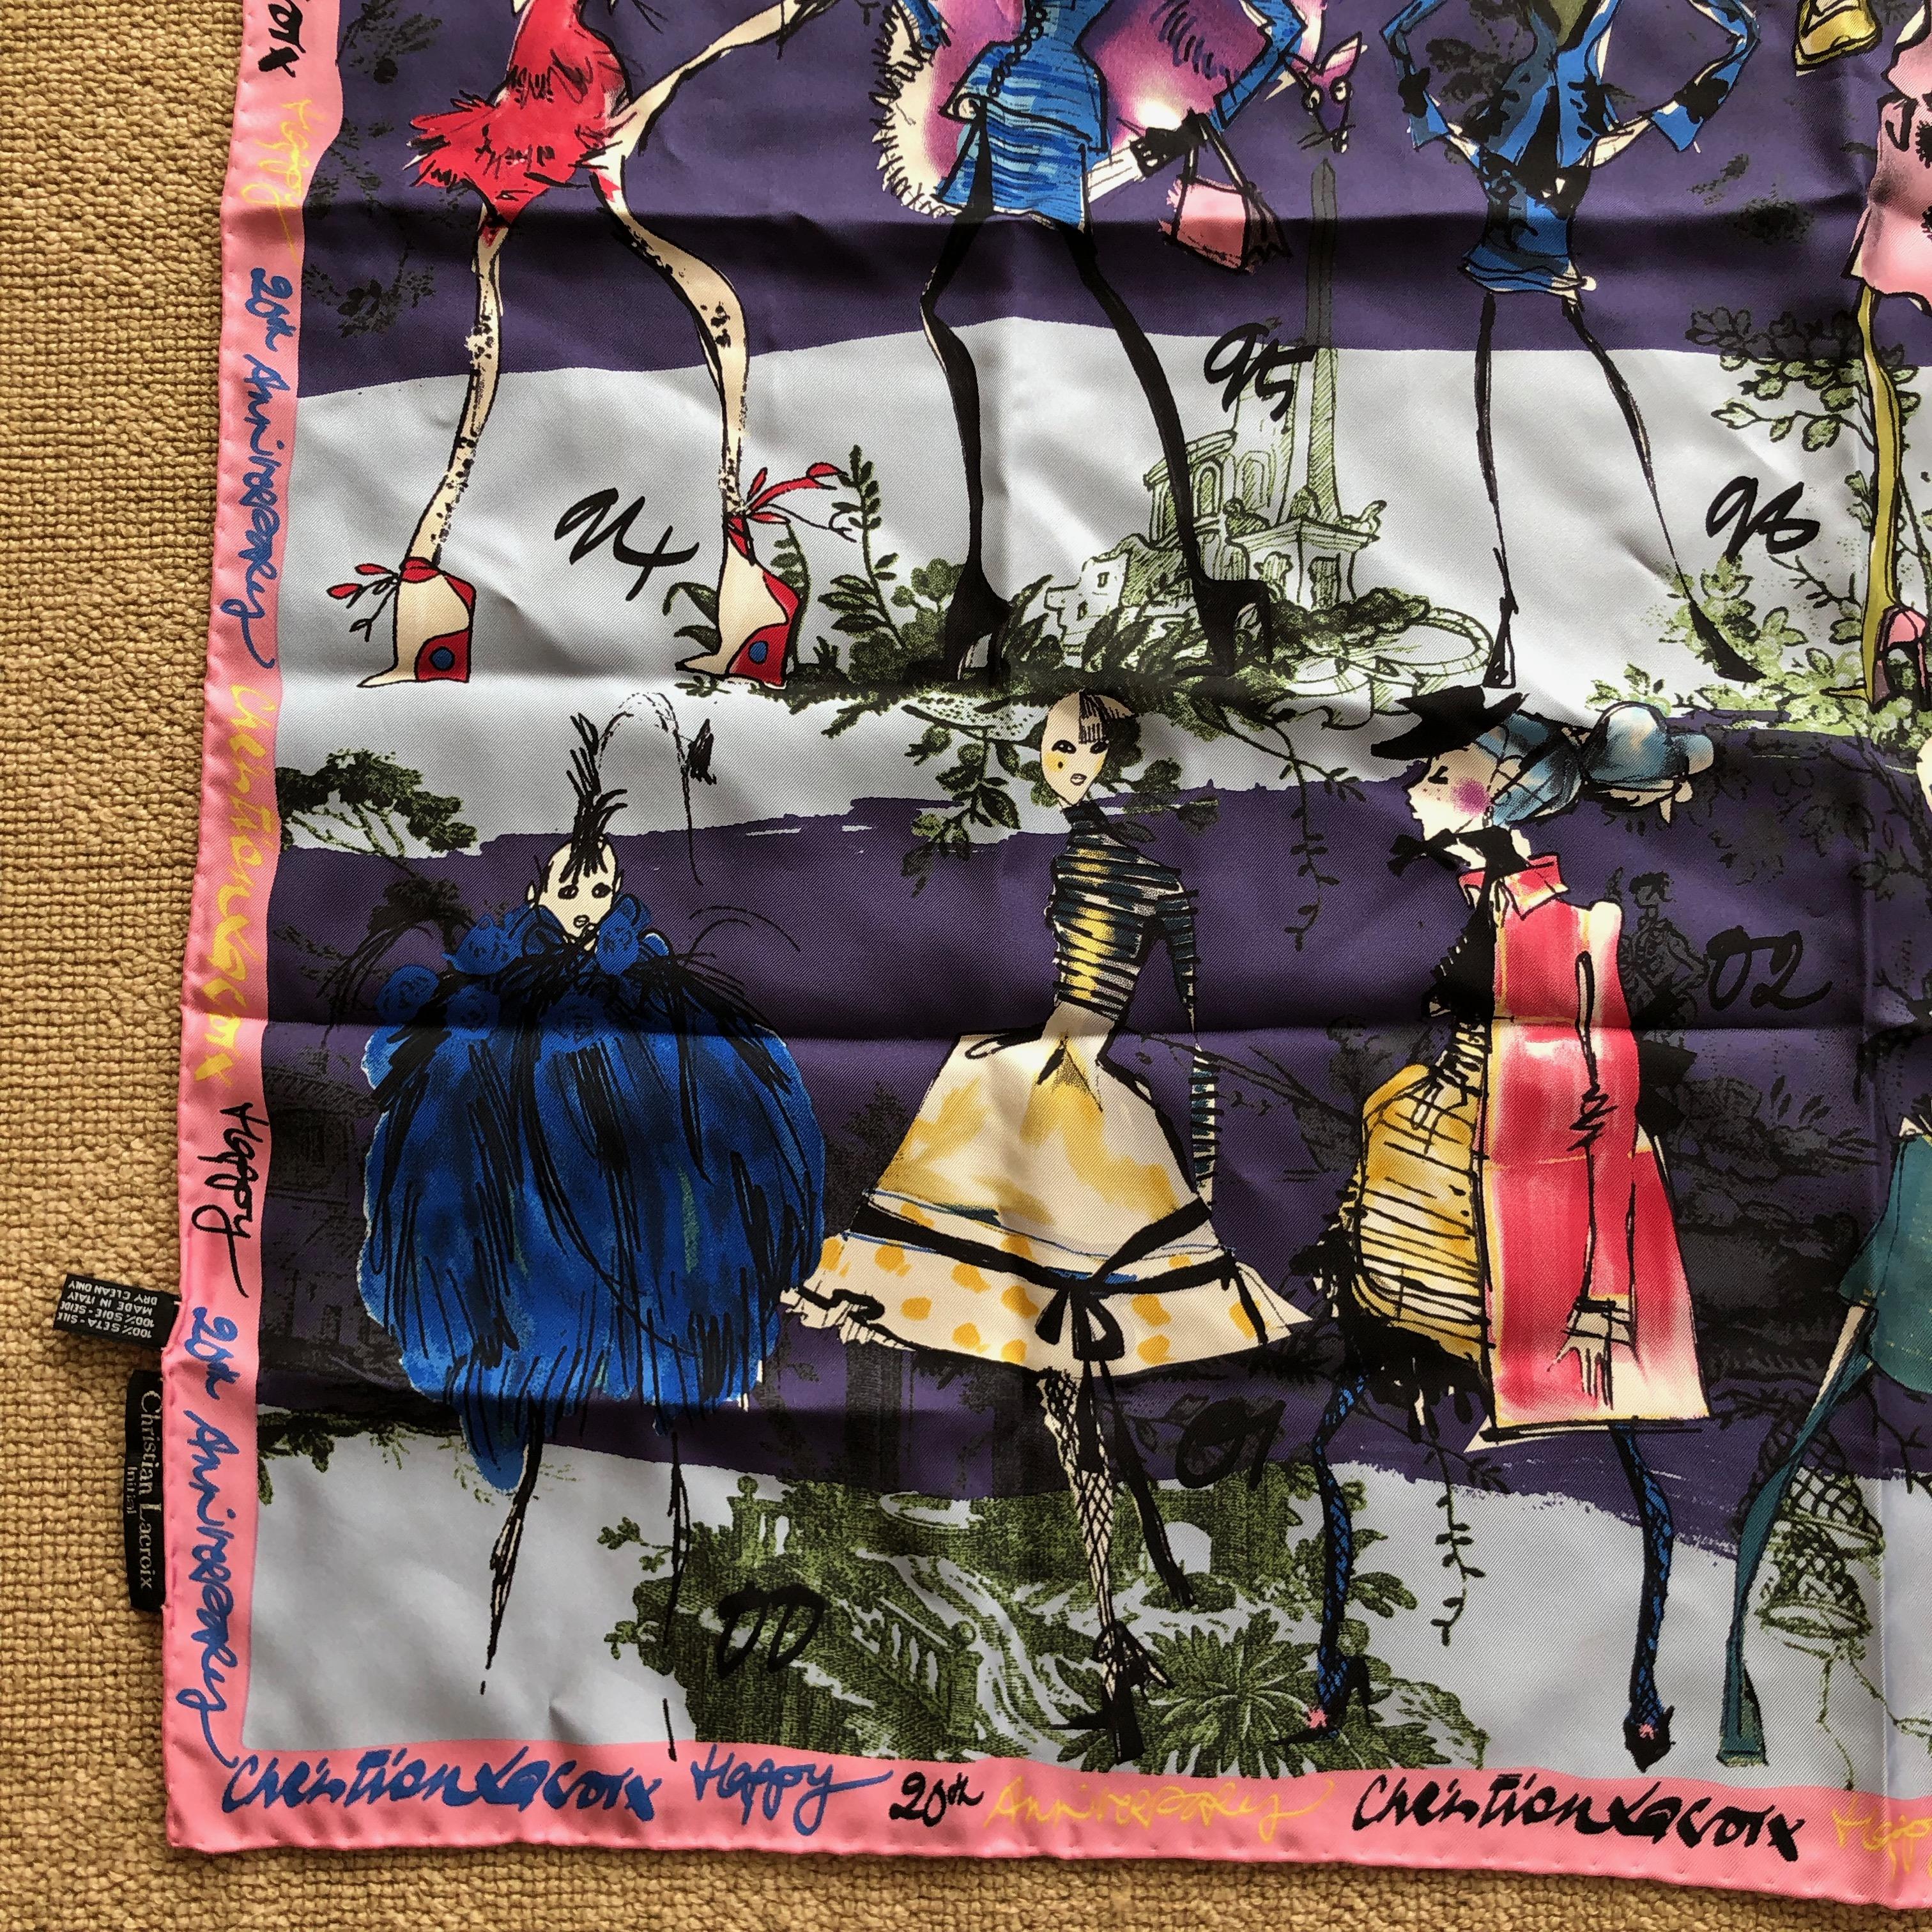 Christian Lacroix 20 Year Anniversary Commemerative Silk Scarf  In Excellent Condition For Sale In Cloverdale, CA